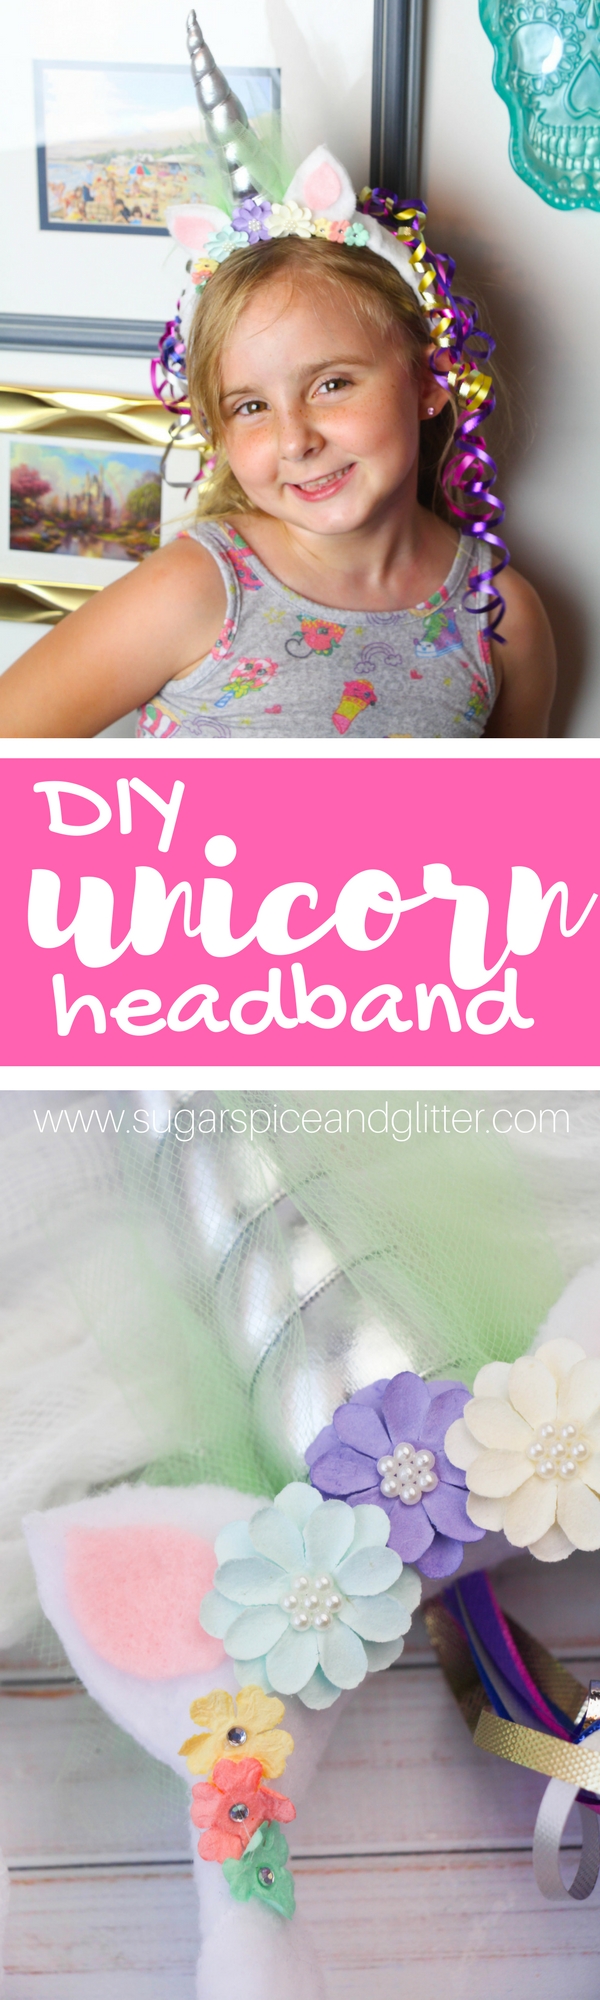 How cute is this Unicorn Headband kids can help make? Perfect for a DIY unicorn costume, a unicorn party idea or just a fun accessory for a unicorn-obsessed kid